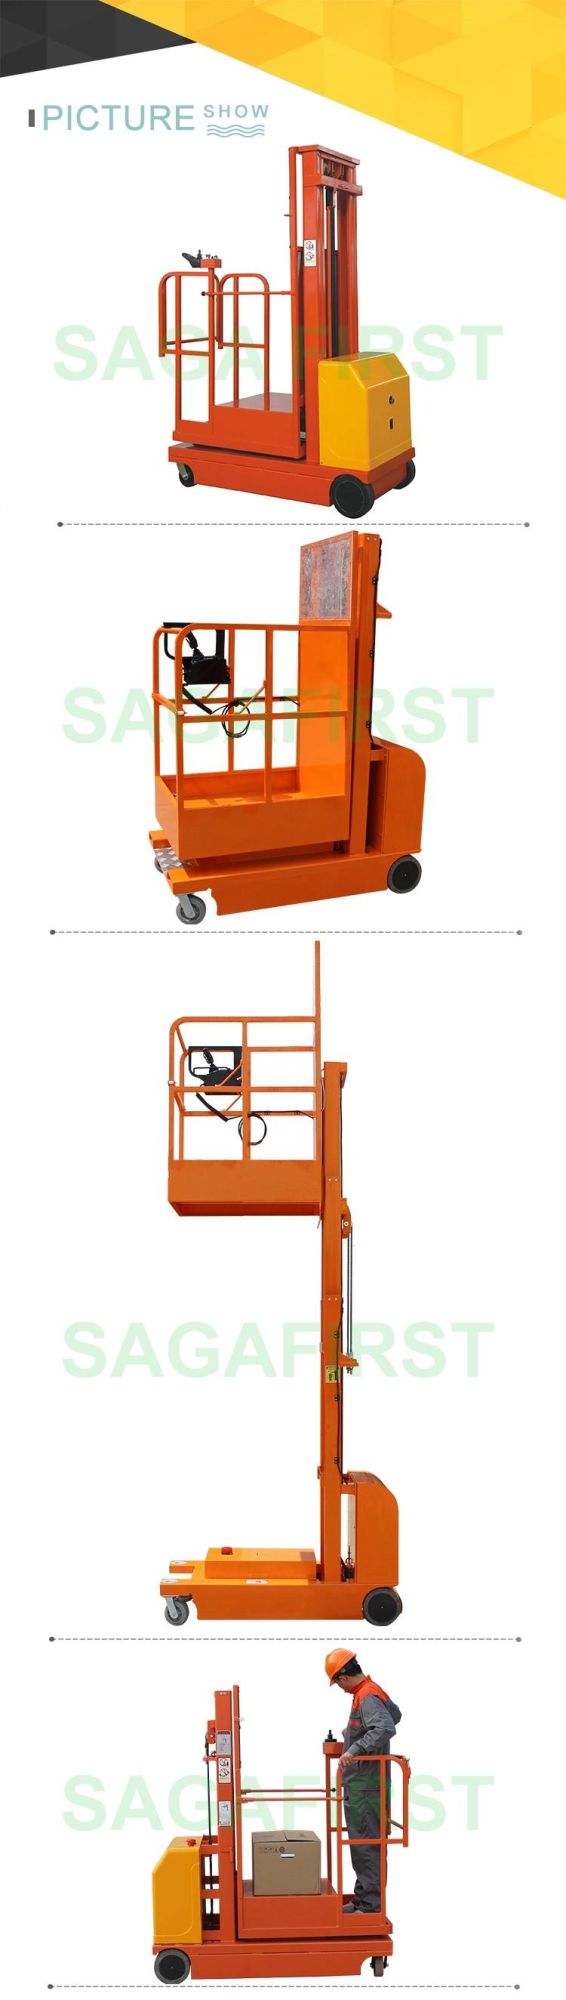 Electric Order Picker Battary Powered Hydraulic Mobile Order Picker